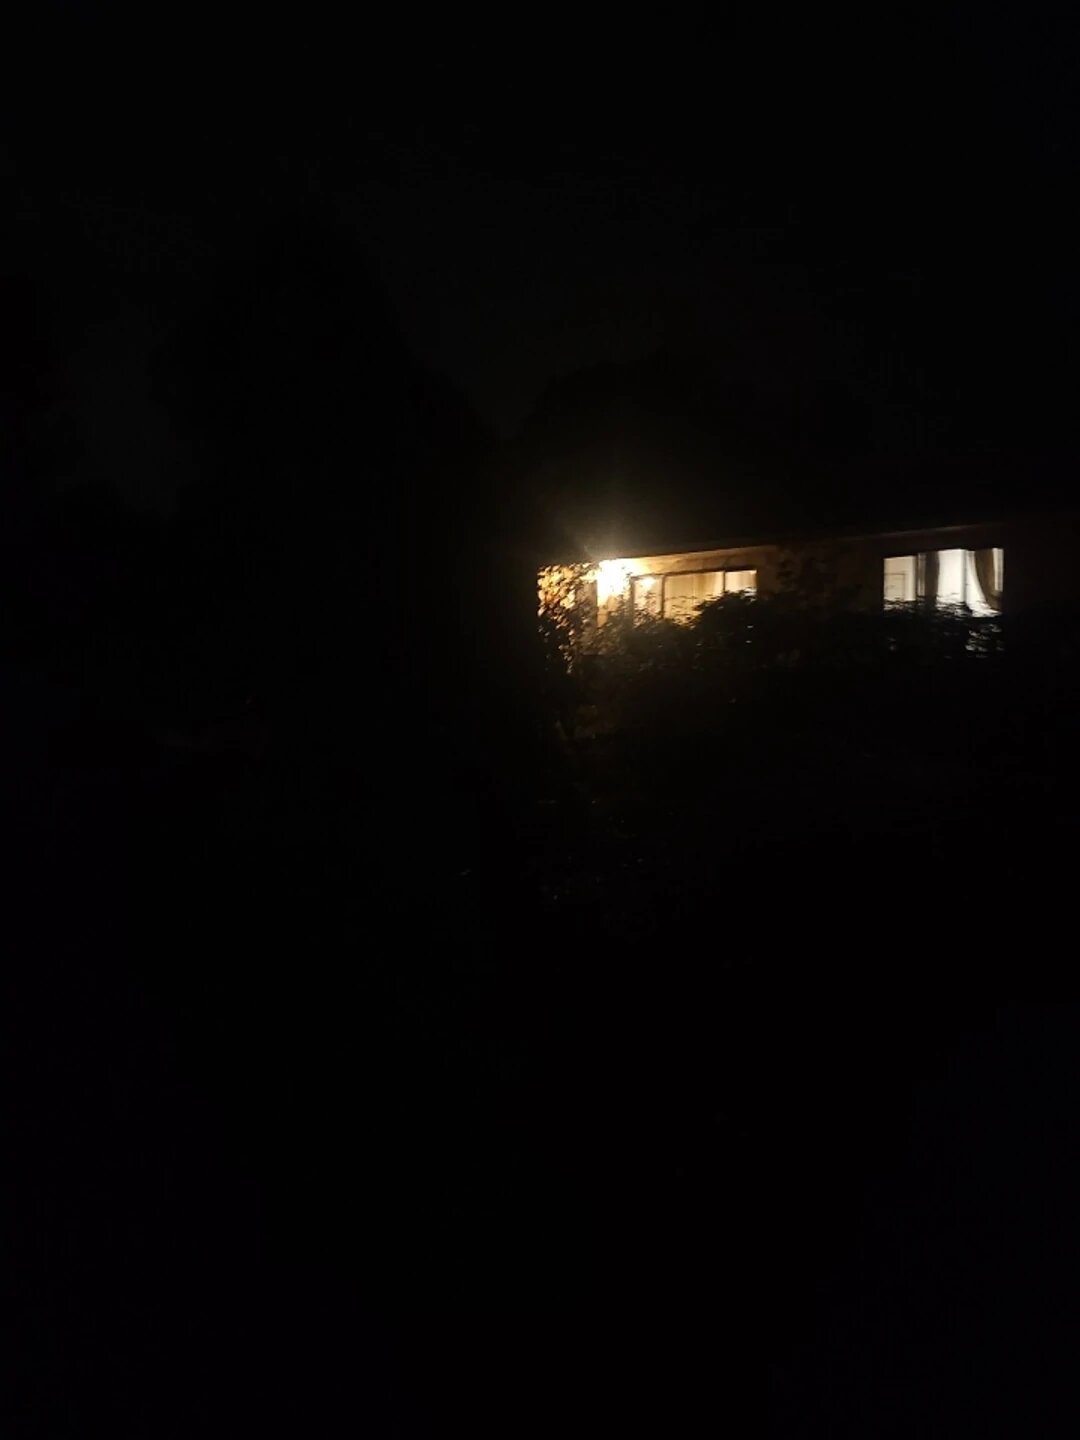 house in the dark from an Uber POV, From Uploaded